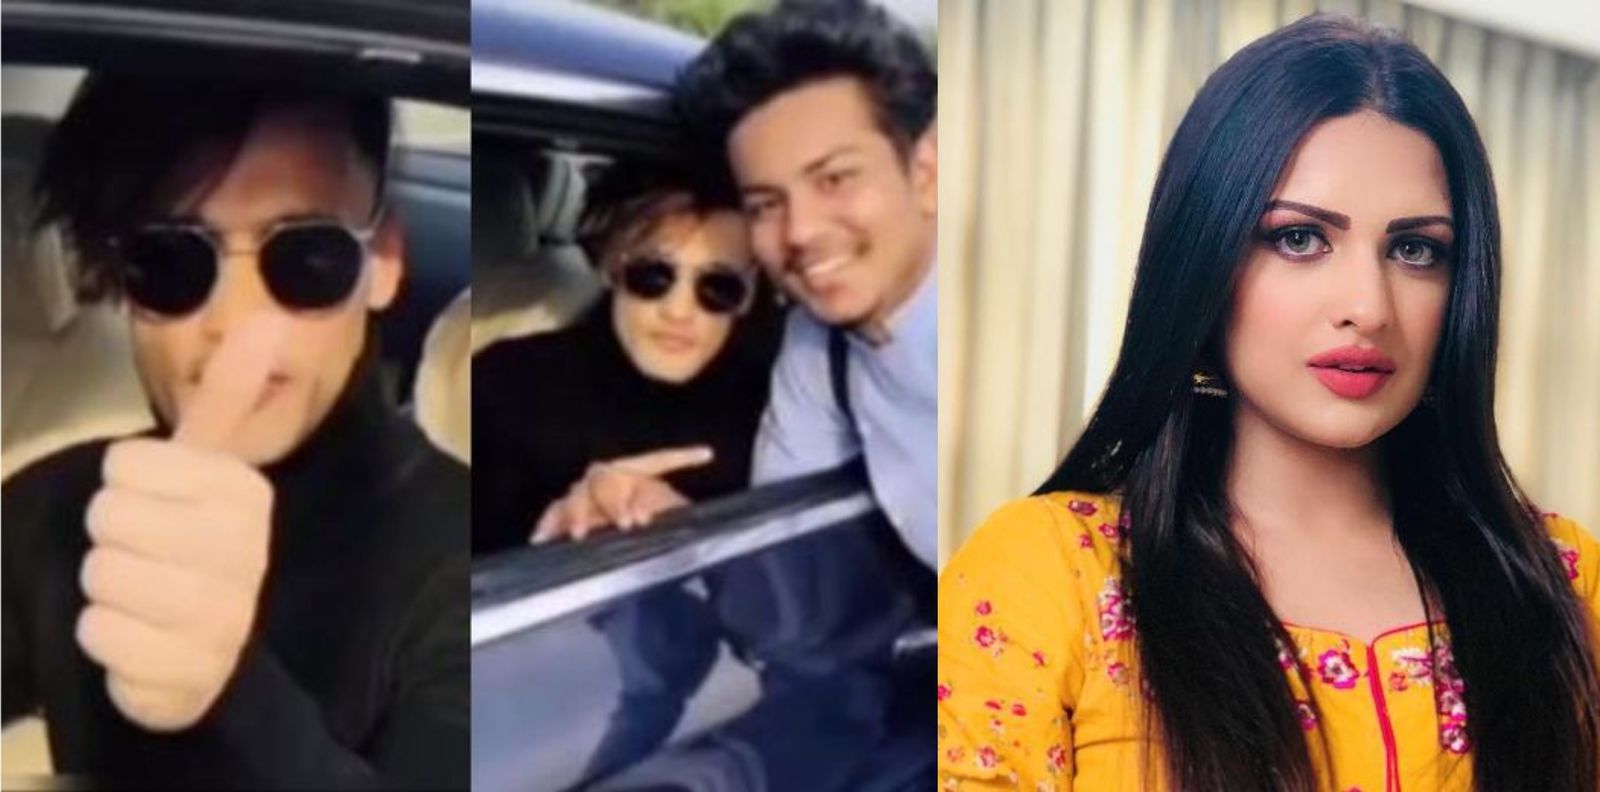 Bigg Boss 13: Asim Riaz Chased By Fans On Bike, GF Himanshi Gets Mobbed! Watch Video...